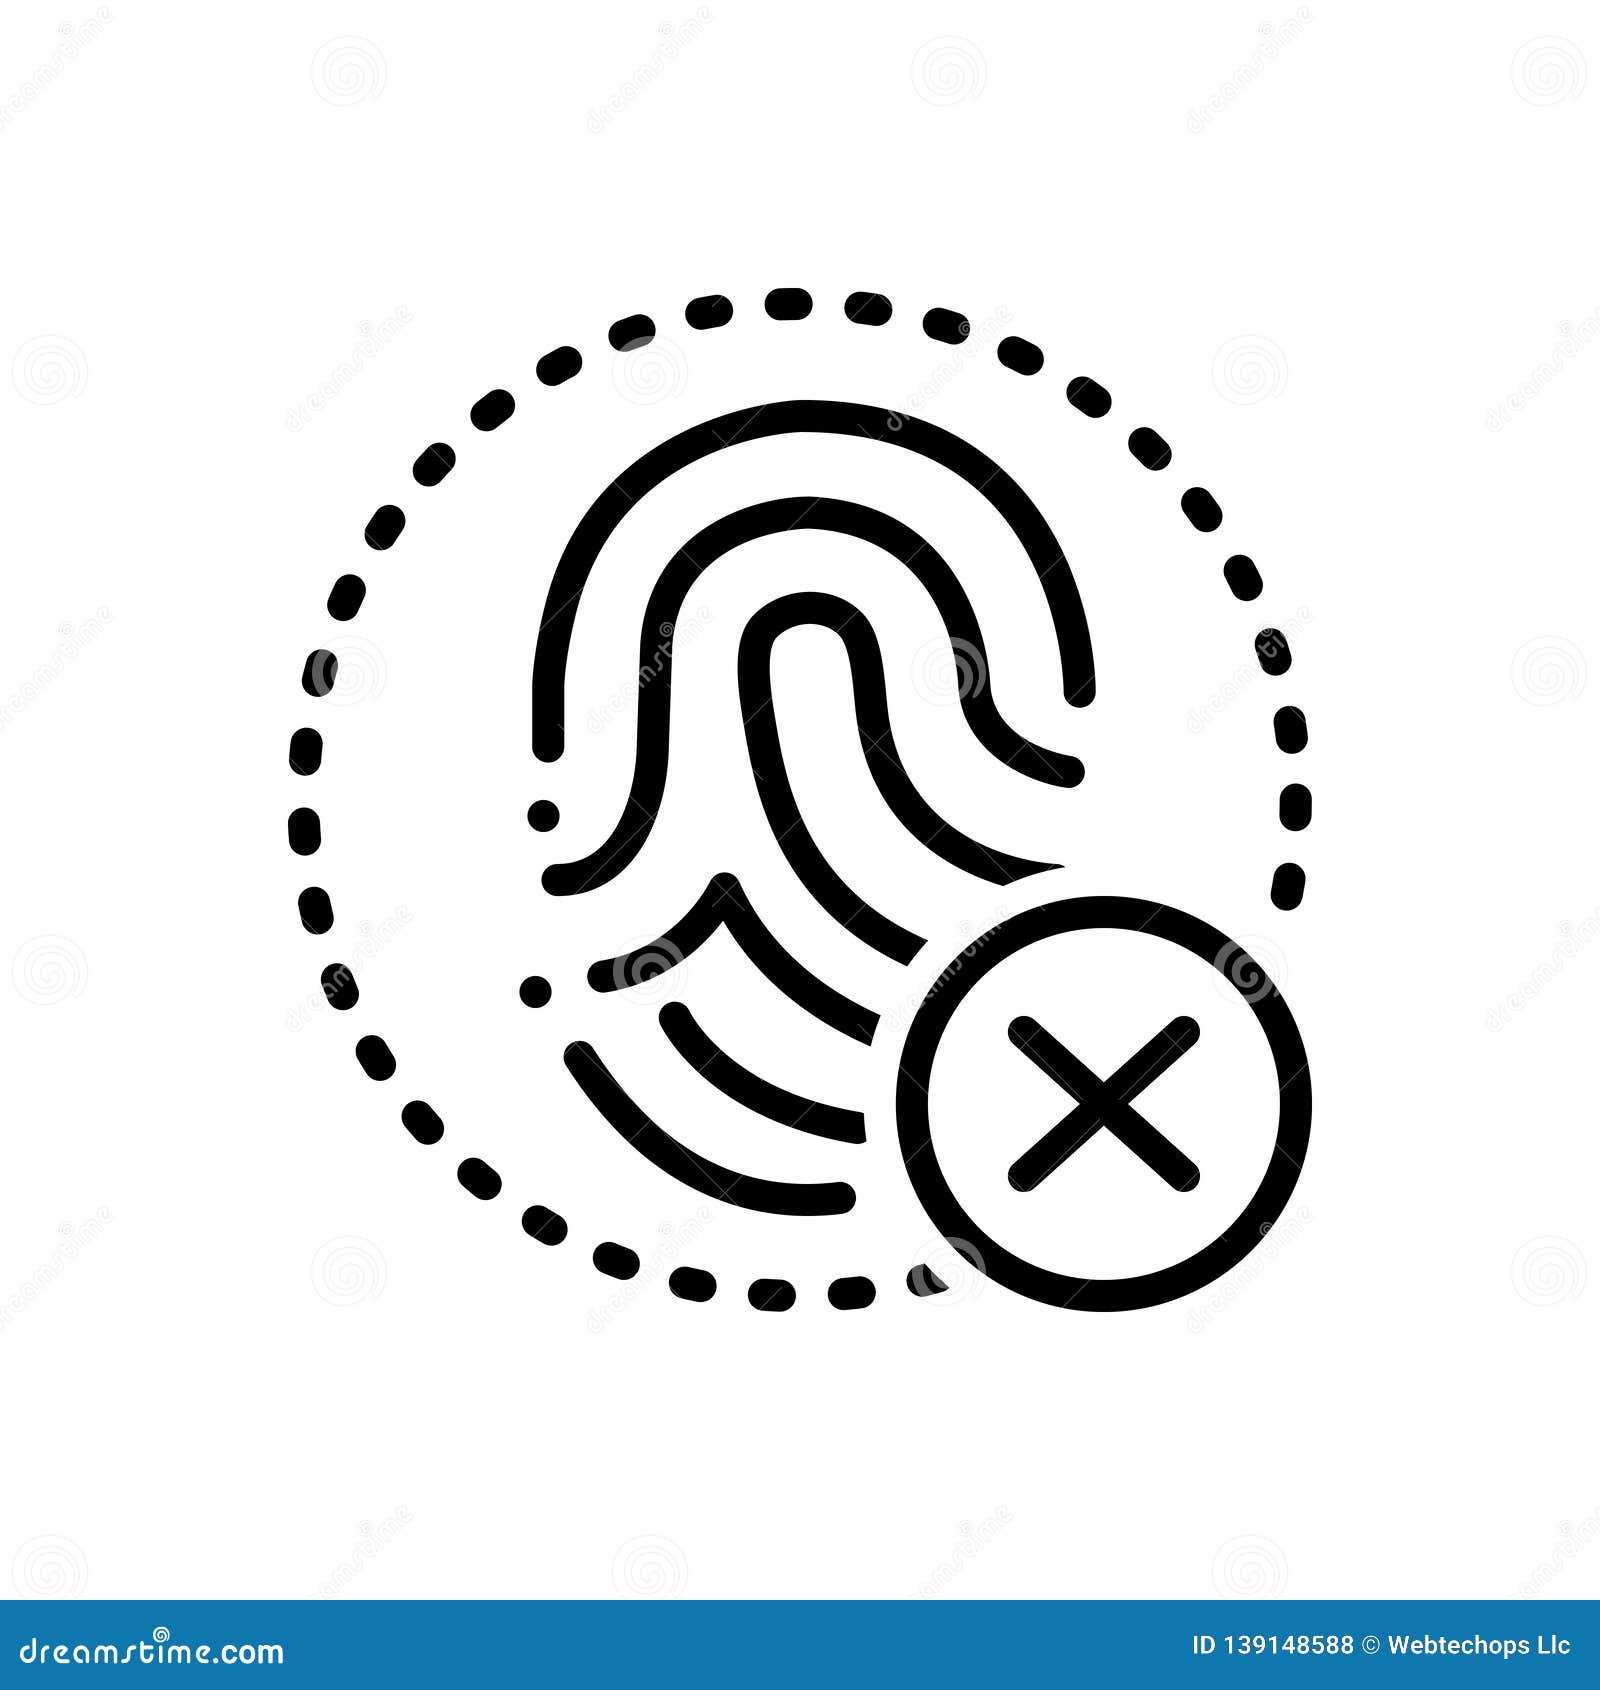 black line icon for fingerprint cancelation,  and biometry